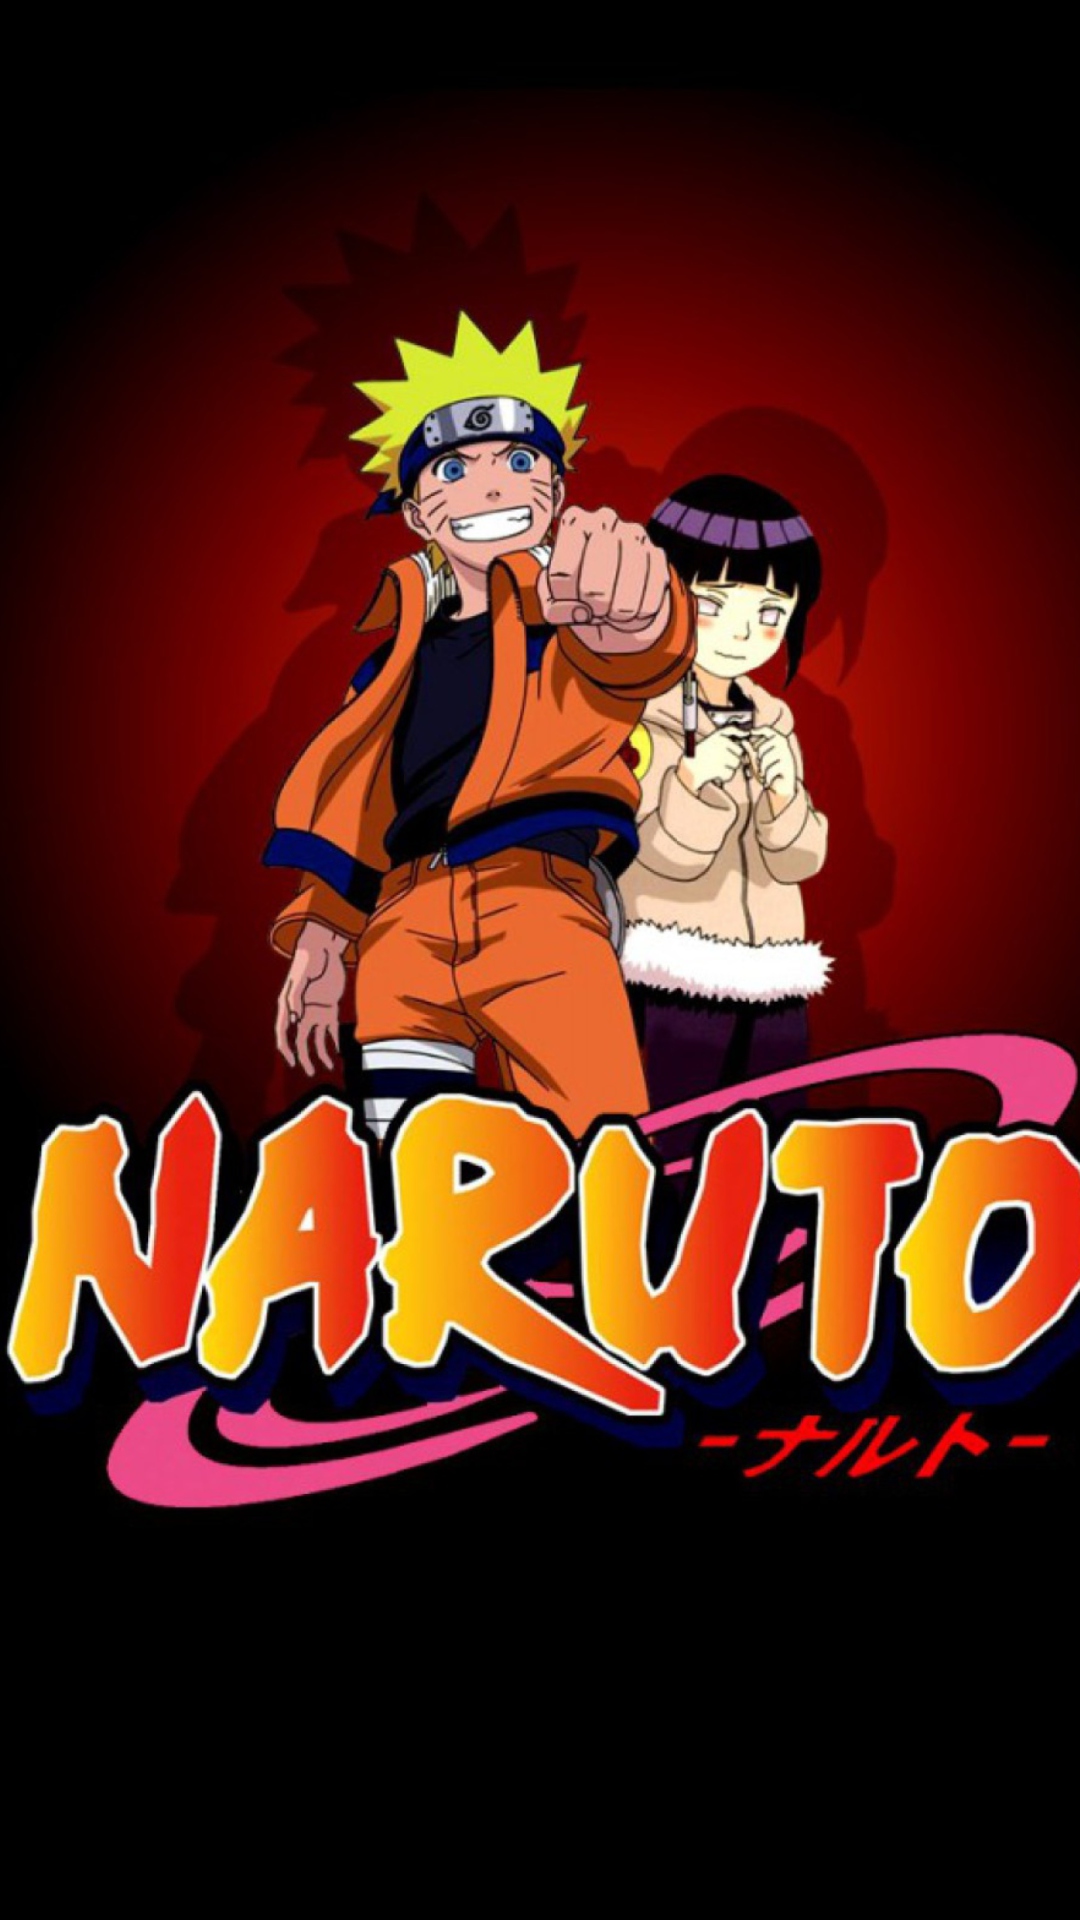 Unexpected Naruto Shippuden Anime Hd Desktop Wallpapers Picture Awesome  Anime Hd Computer Wallpapers For Iphone Android Facebook Mobile With Quotes  Desktop Ipad Ipod Hd  照片图像